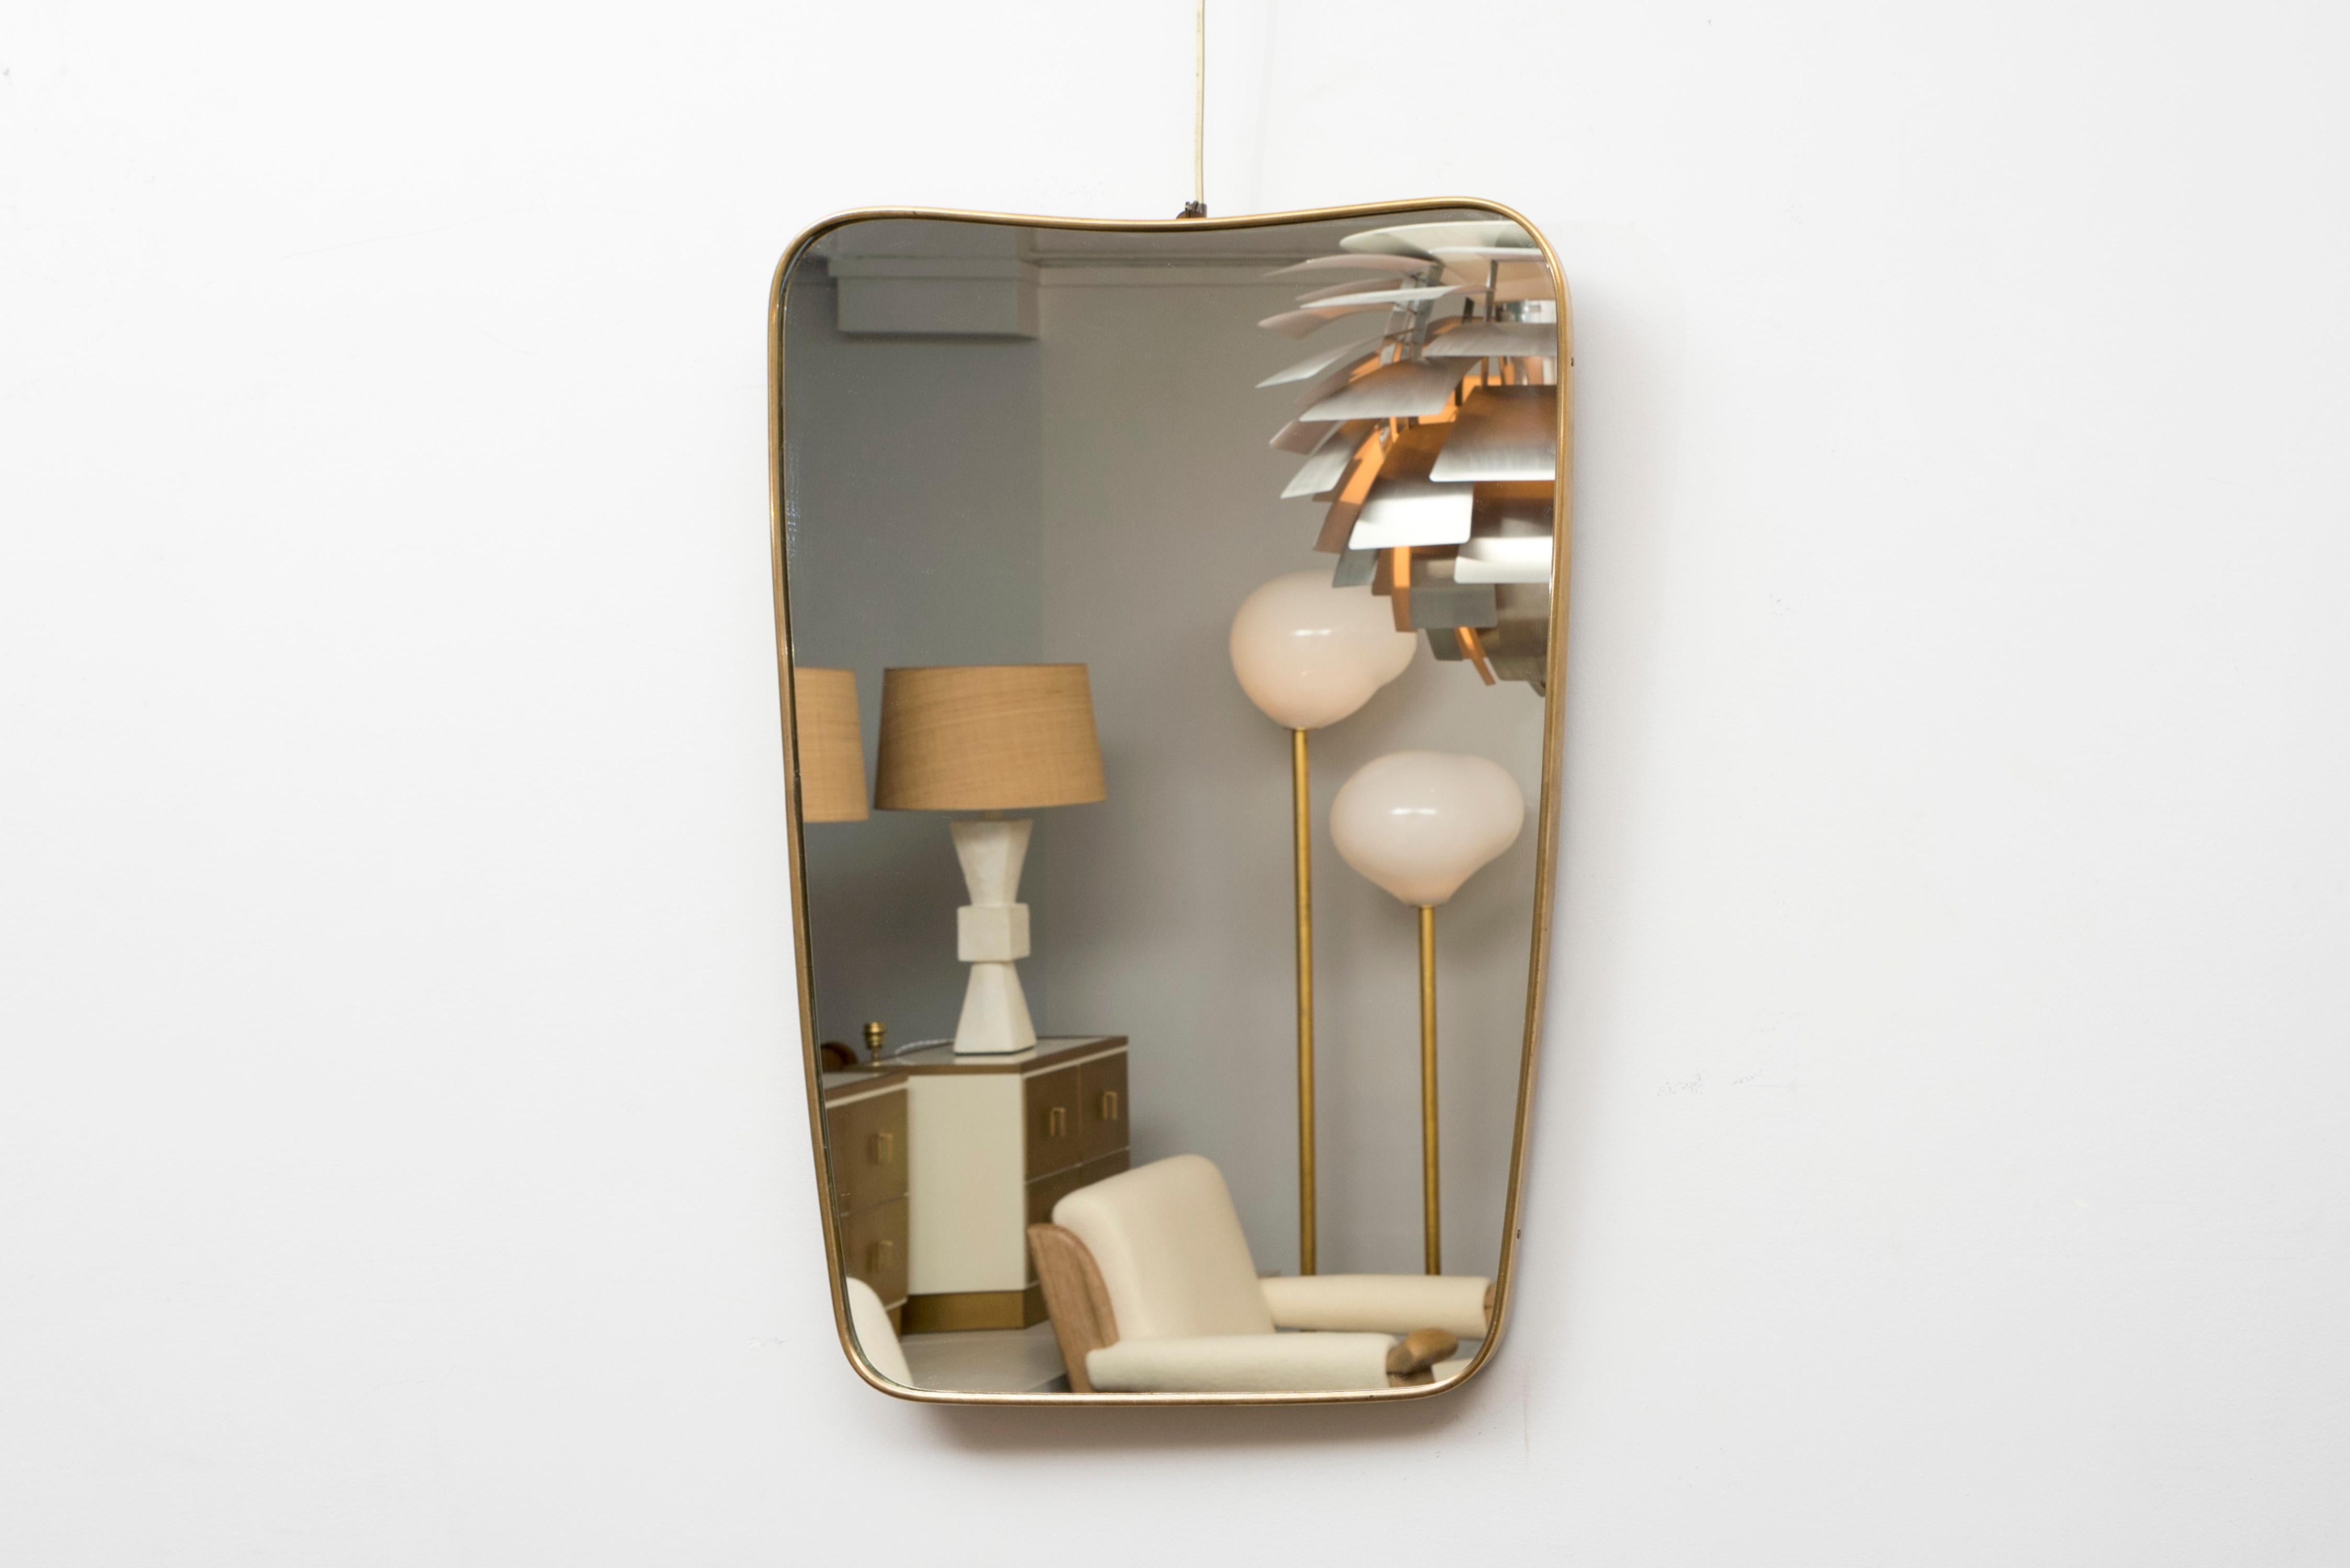 Wall mirror, brass frame, 
in the style of Gio Ponti, 
Italy, circa 1955. 

Measures: 
H : 69 cm (27.1 in.)
W : 49.5 cm (19.5 in.)
D : 2.5 cm ( 1.0 in.).